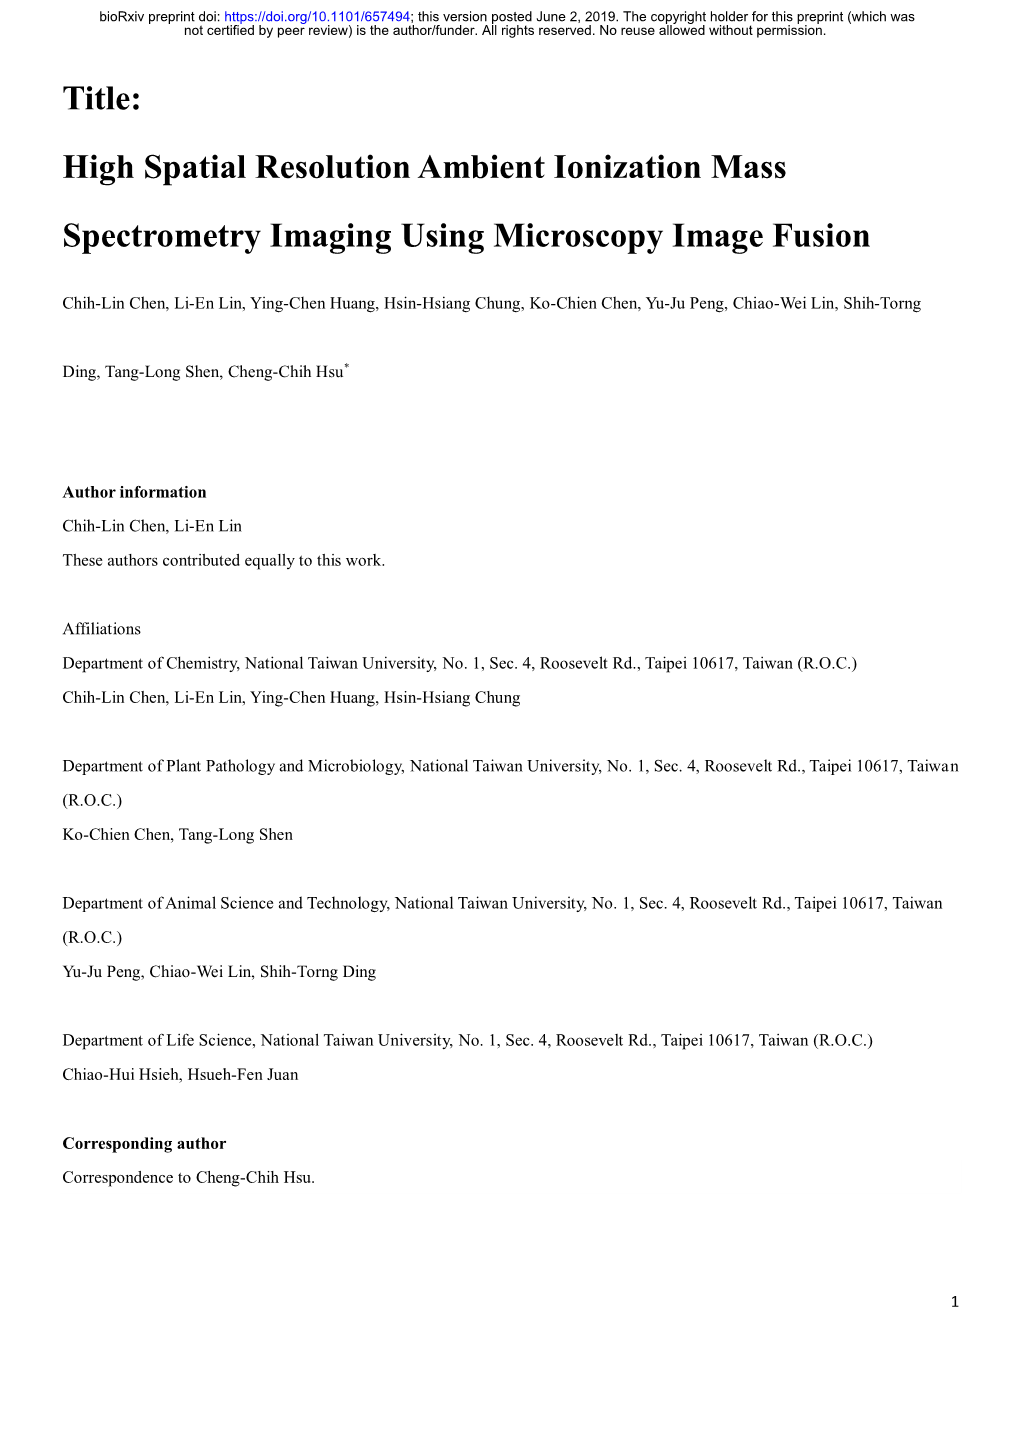 High Spatial Resolution Ambient Ionization Mass Spectrometry Imaging Using Microscopy Image Fusion